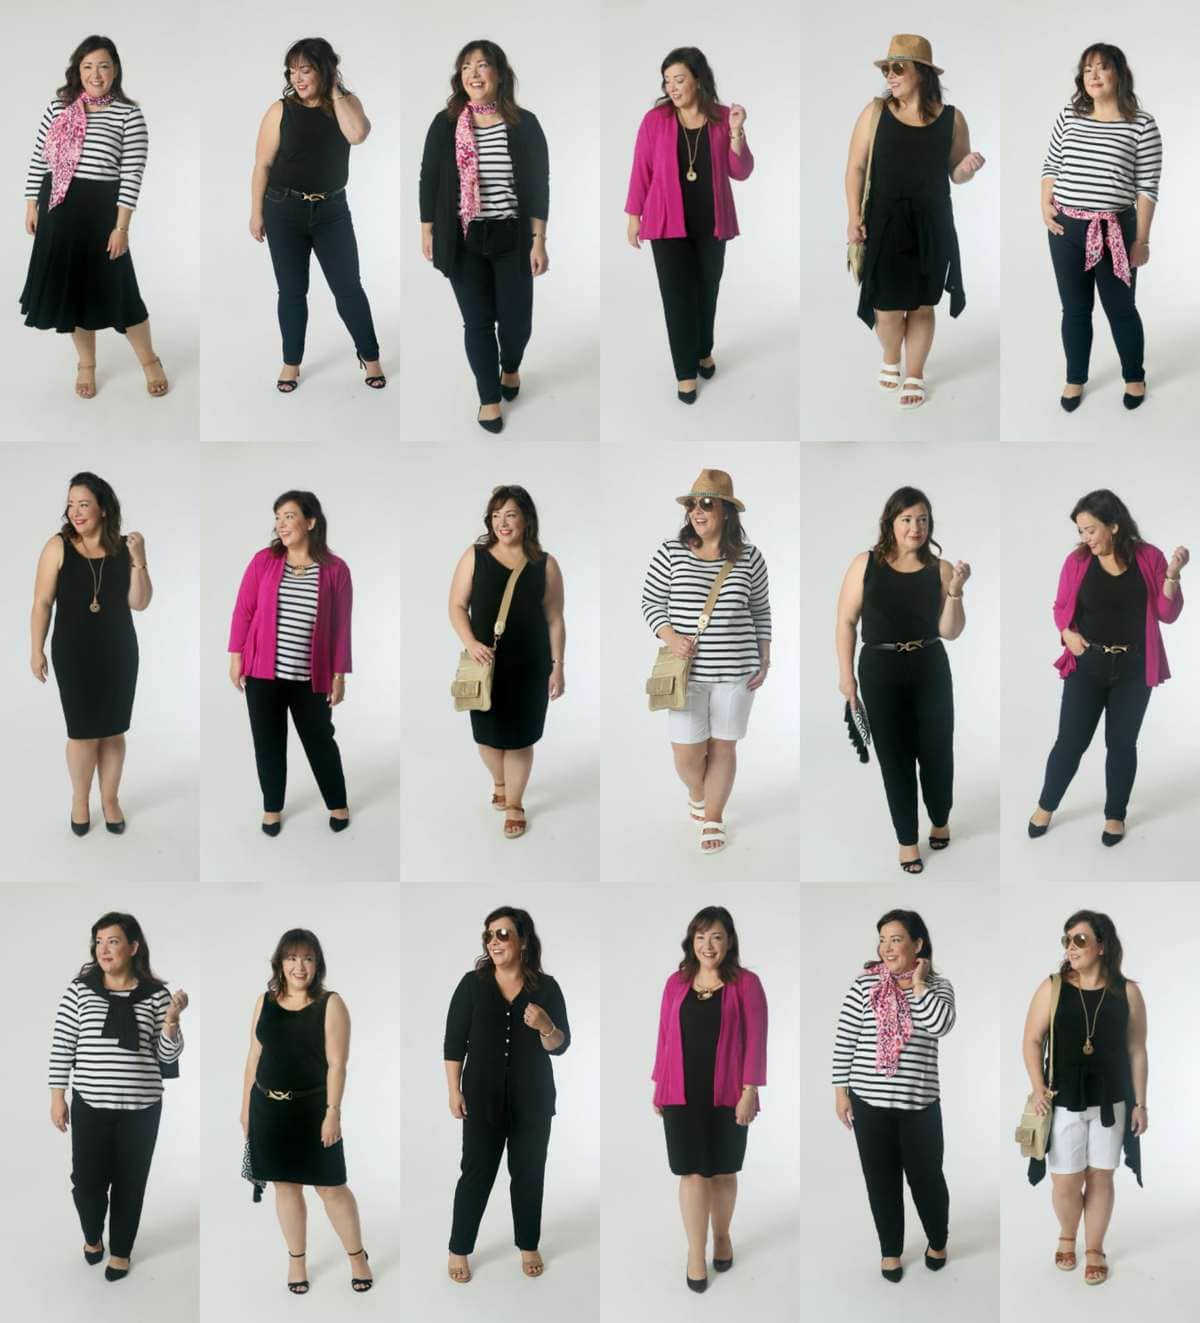 10 pieces of clothing, over 24 looks with Chico's Travelers Collection by Wardrobe Oxygen